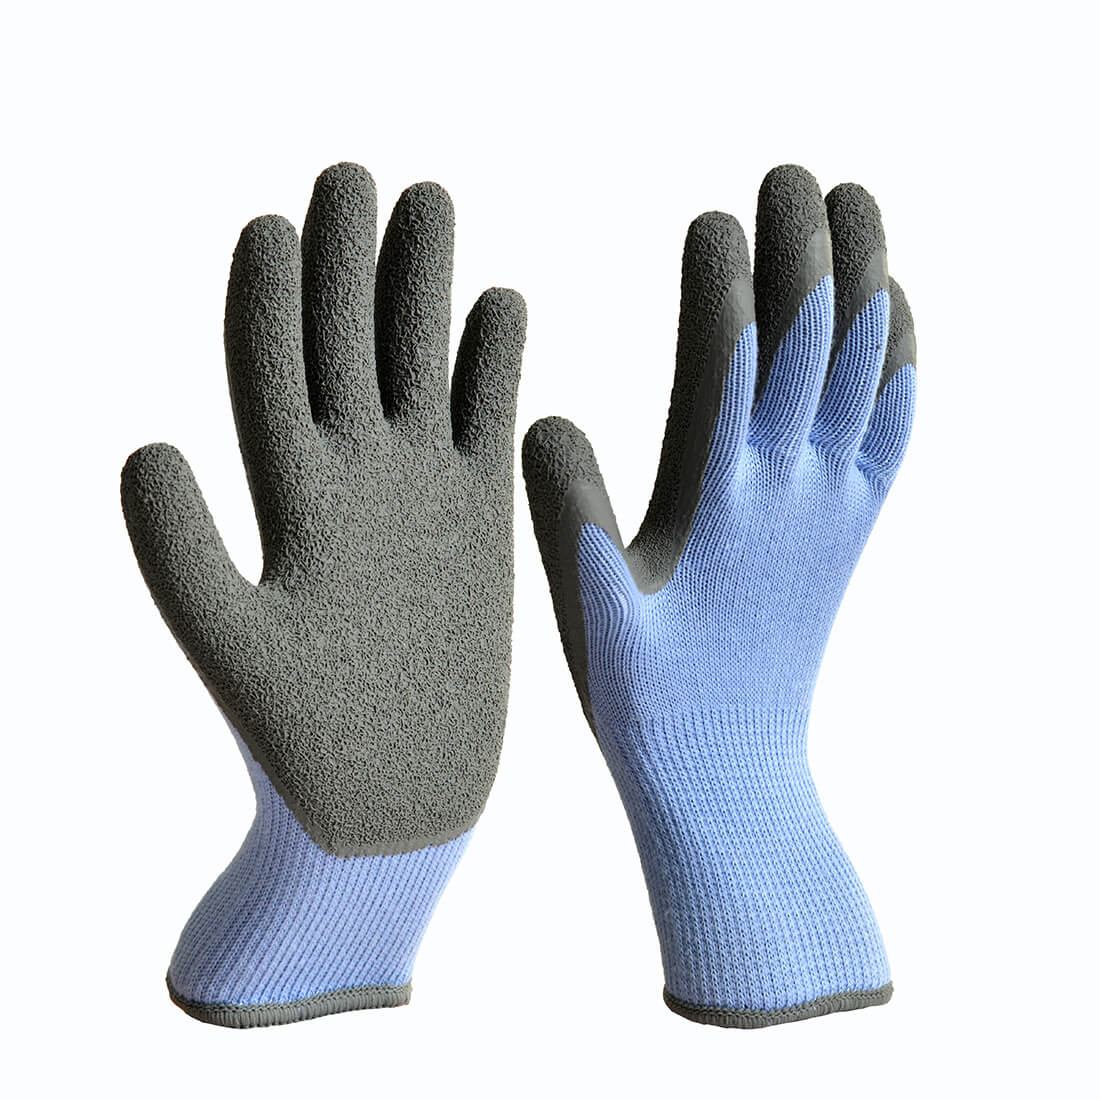 Which is better, and what is the difference between nitrile and latex gloves?